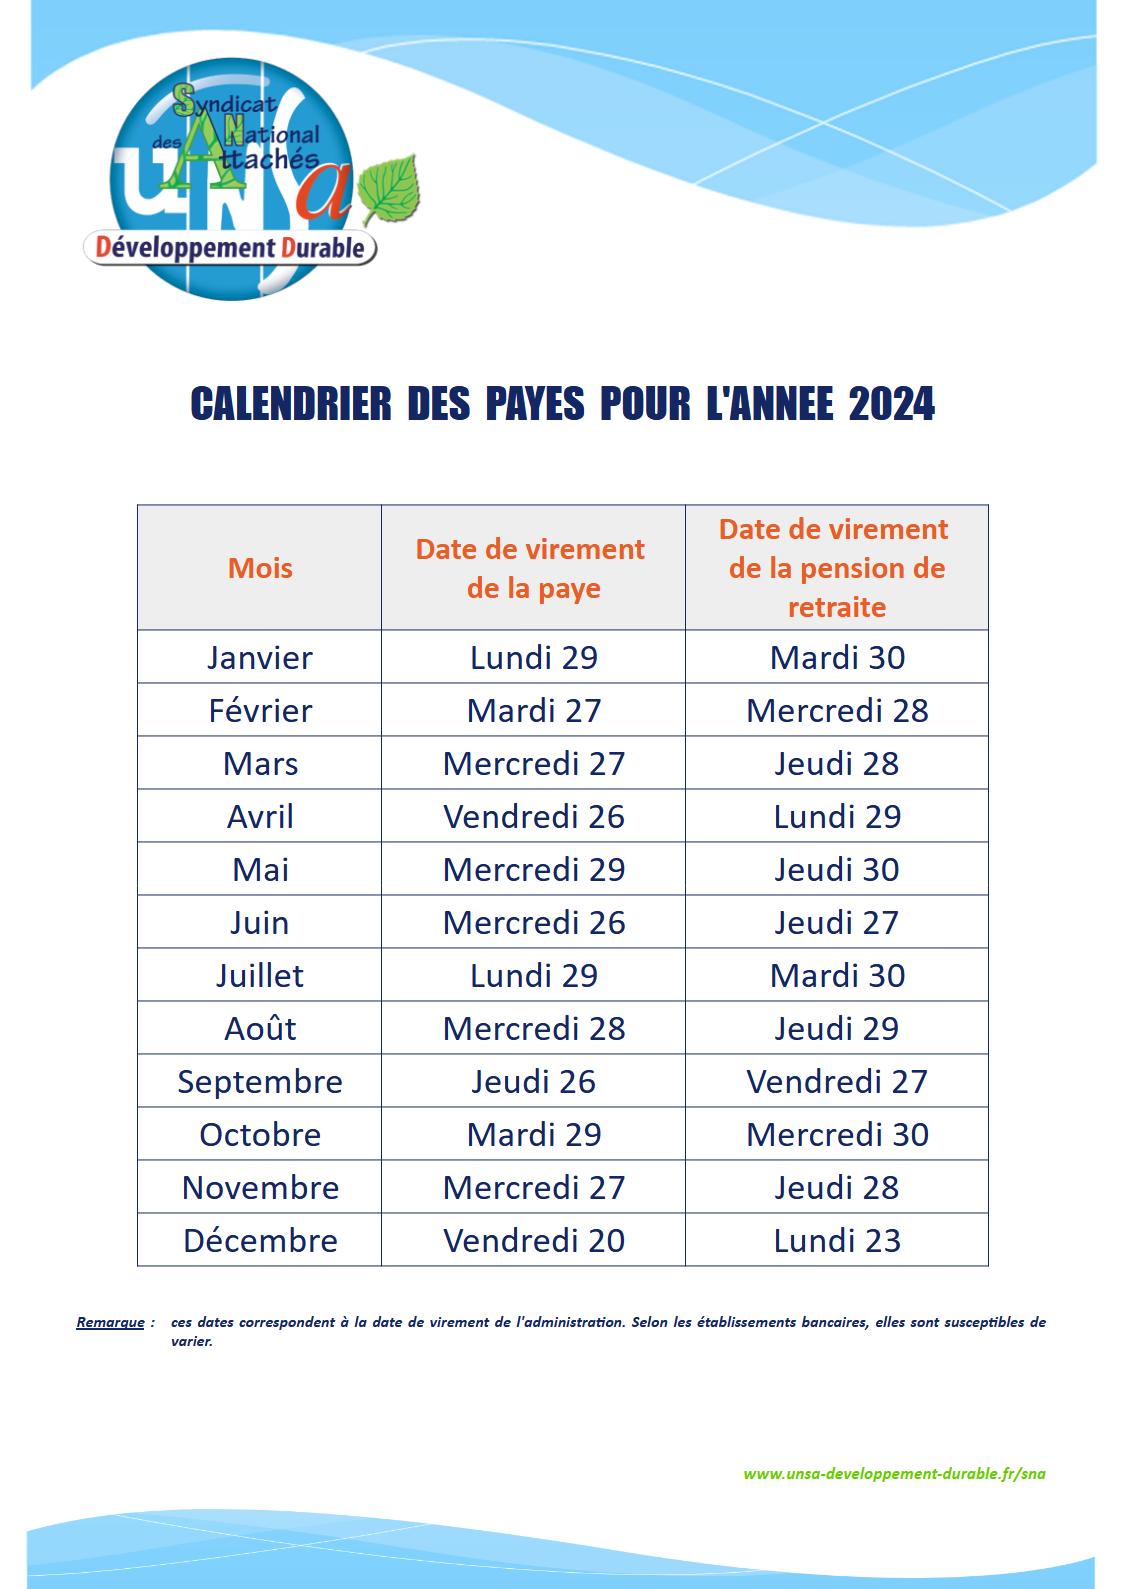 Calendrier des payes 2024 1